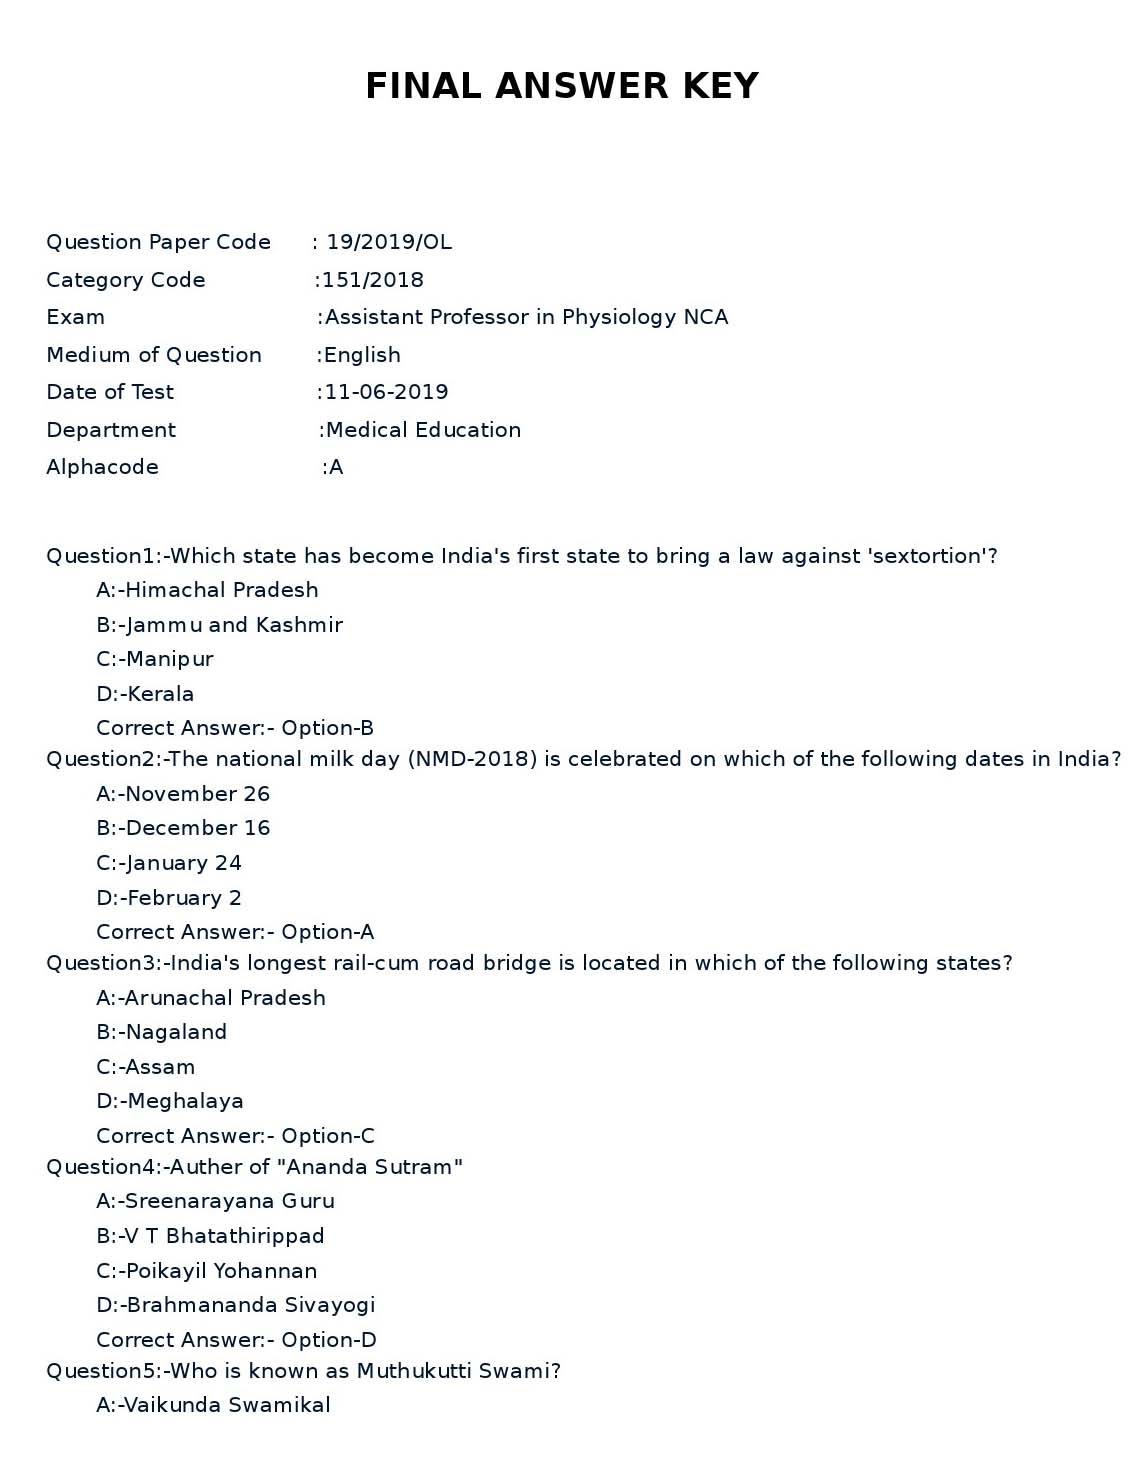 KPSC Assistant Professor in Physiology Exam 2019 Code 192019OL 1